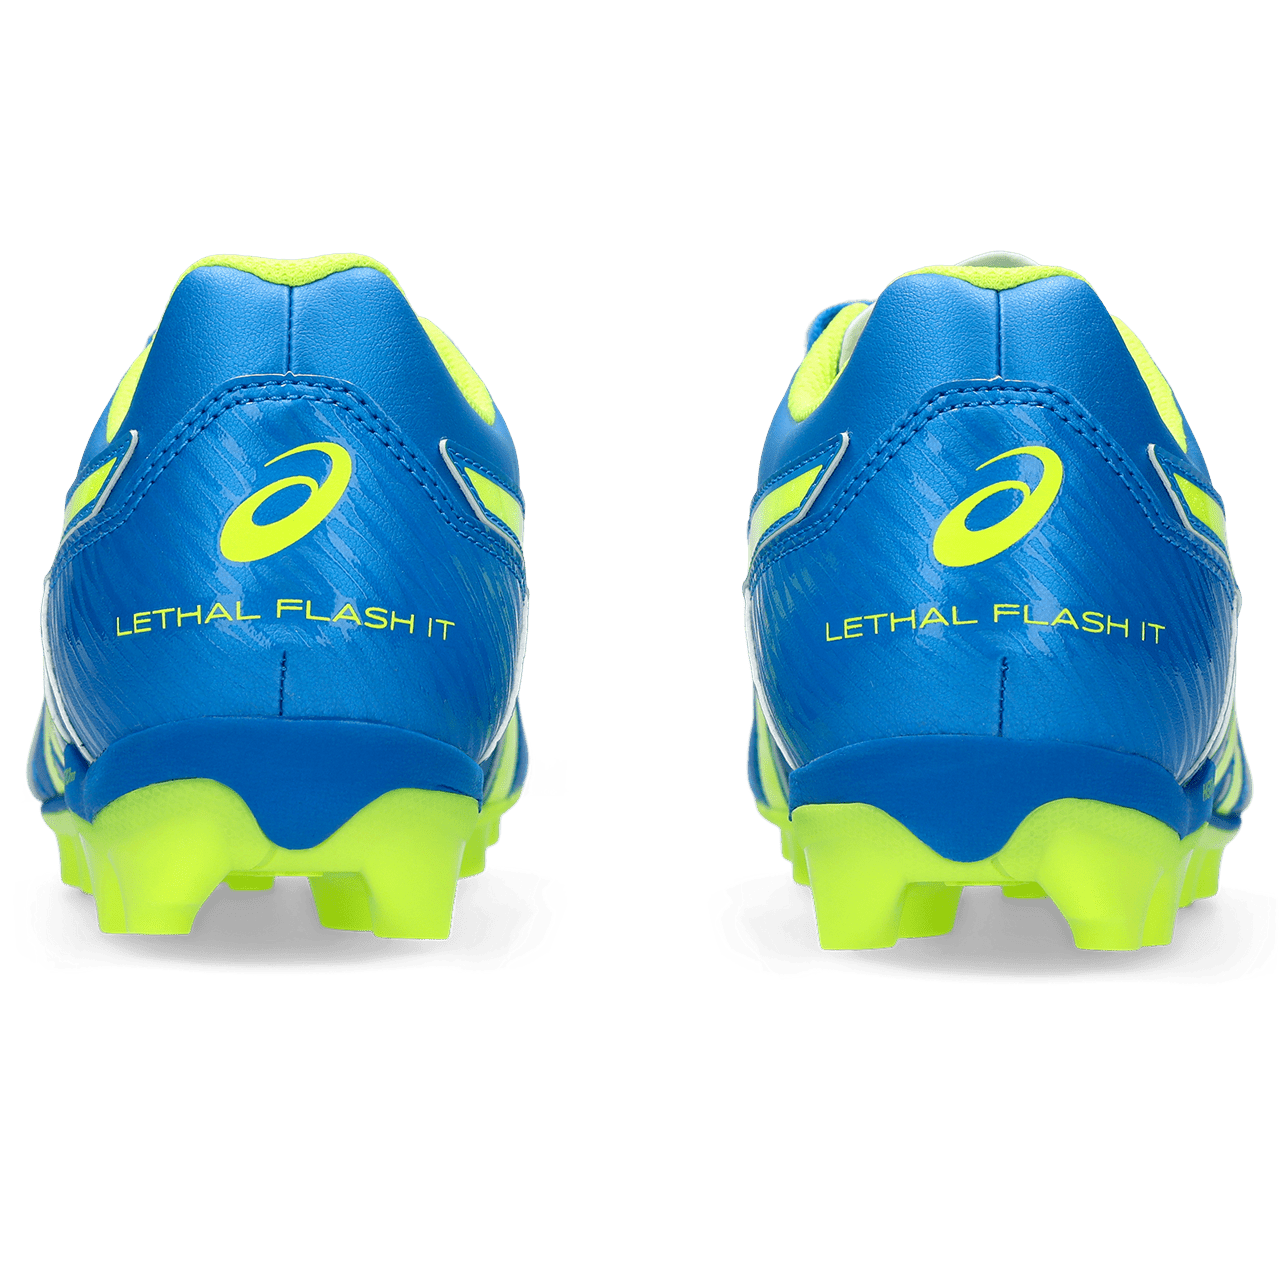 Asics Lethal Flash IT 2 GS Junior Football Boot ELECTRIC BLUE/YELLOW